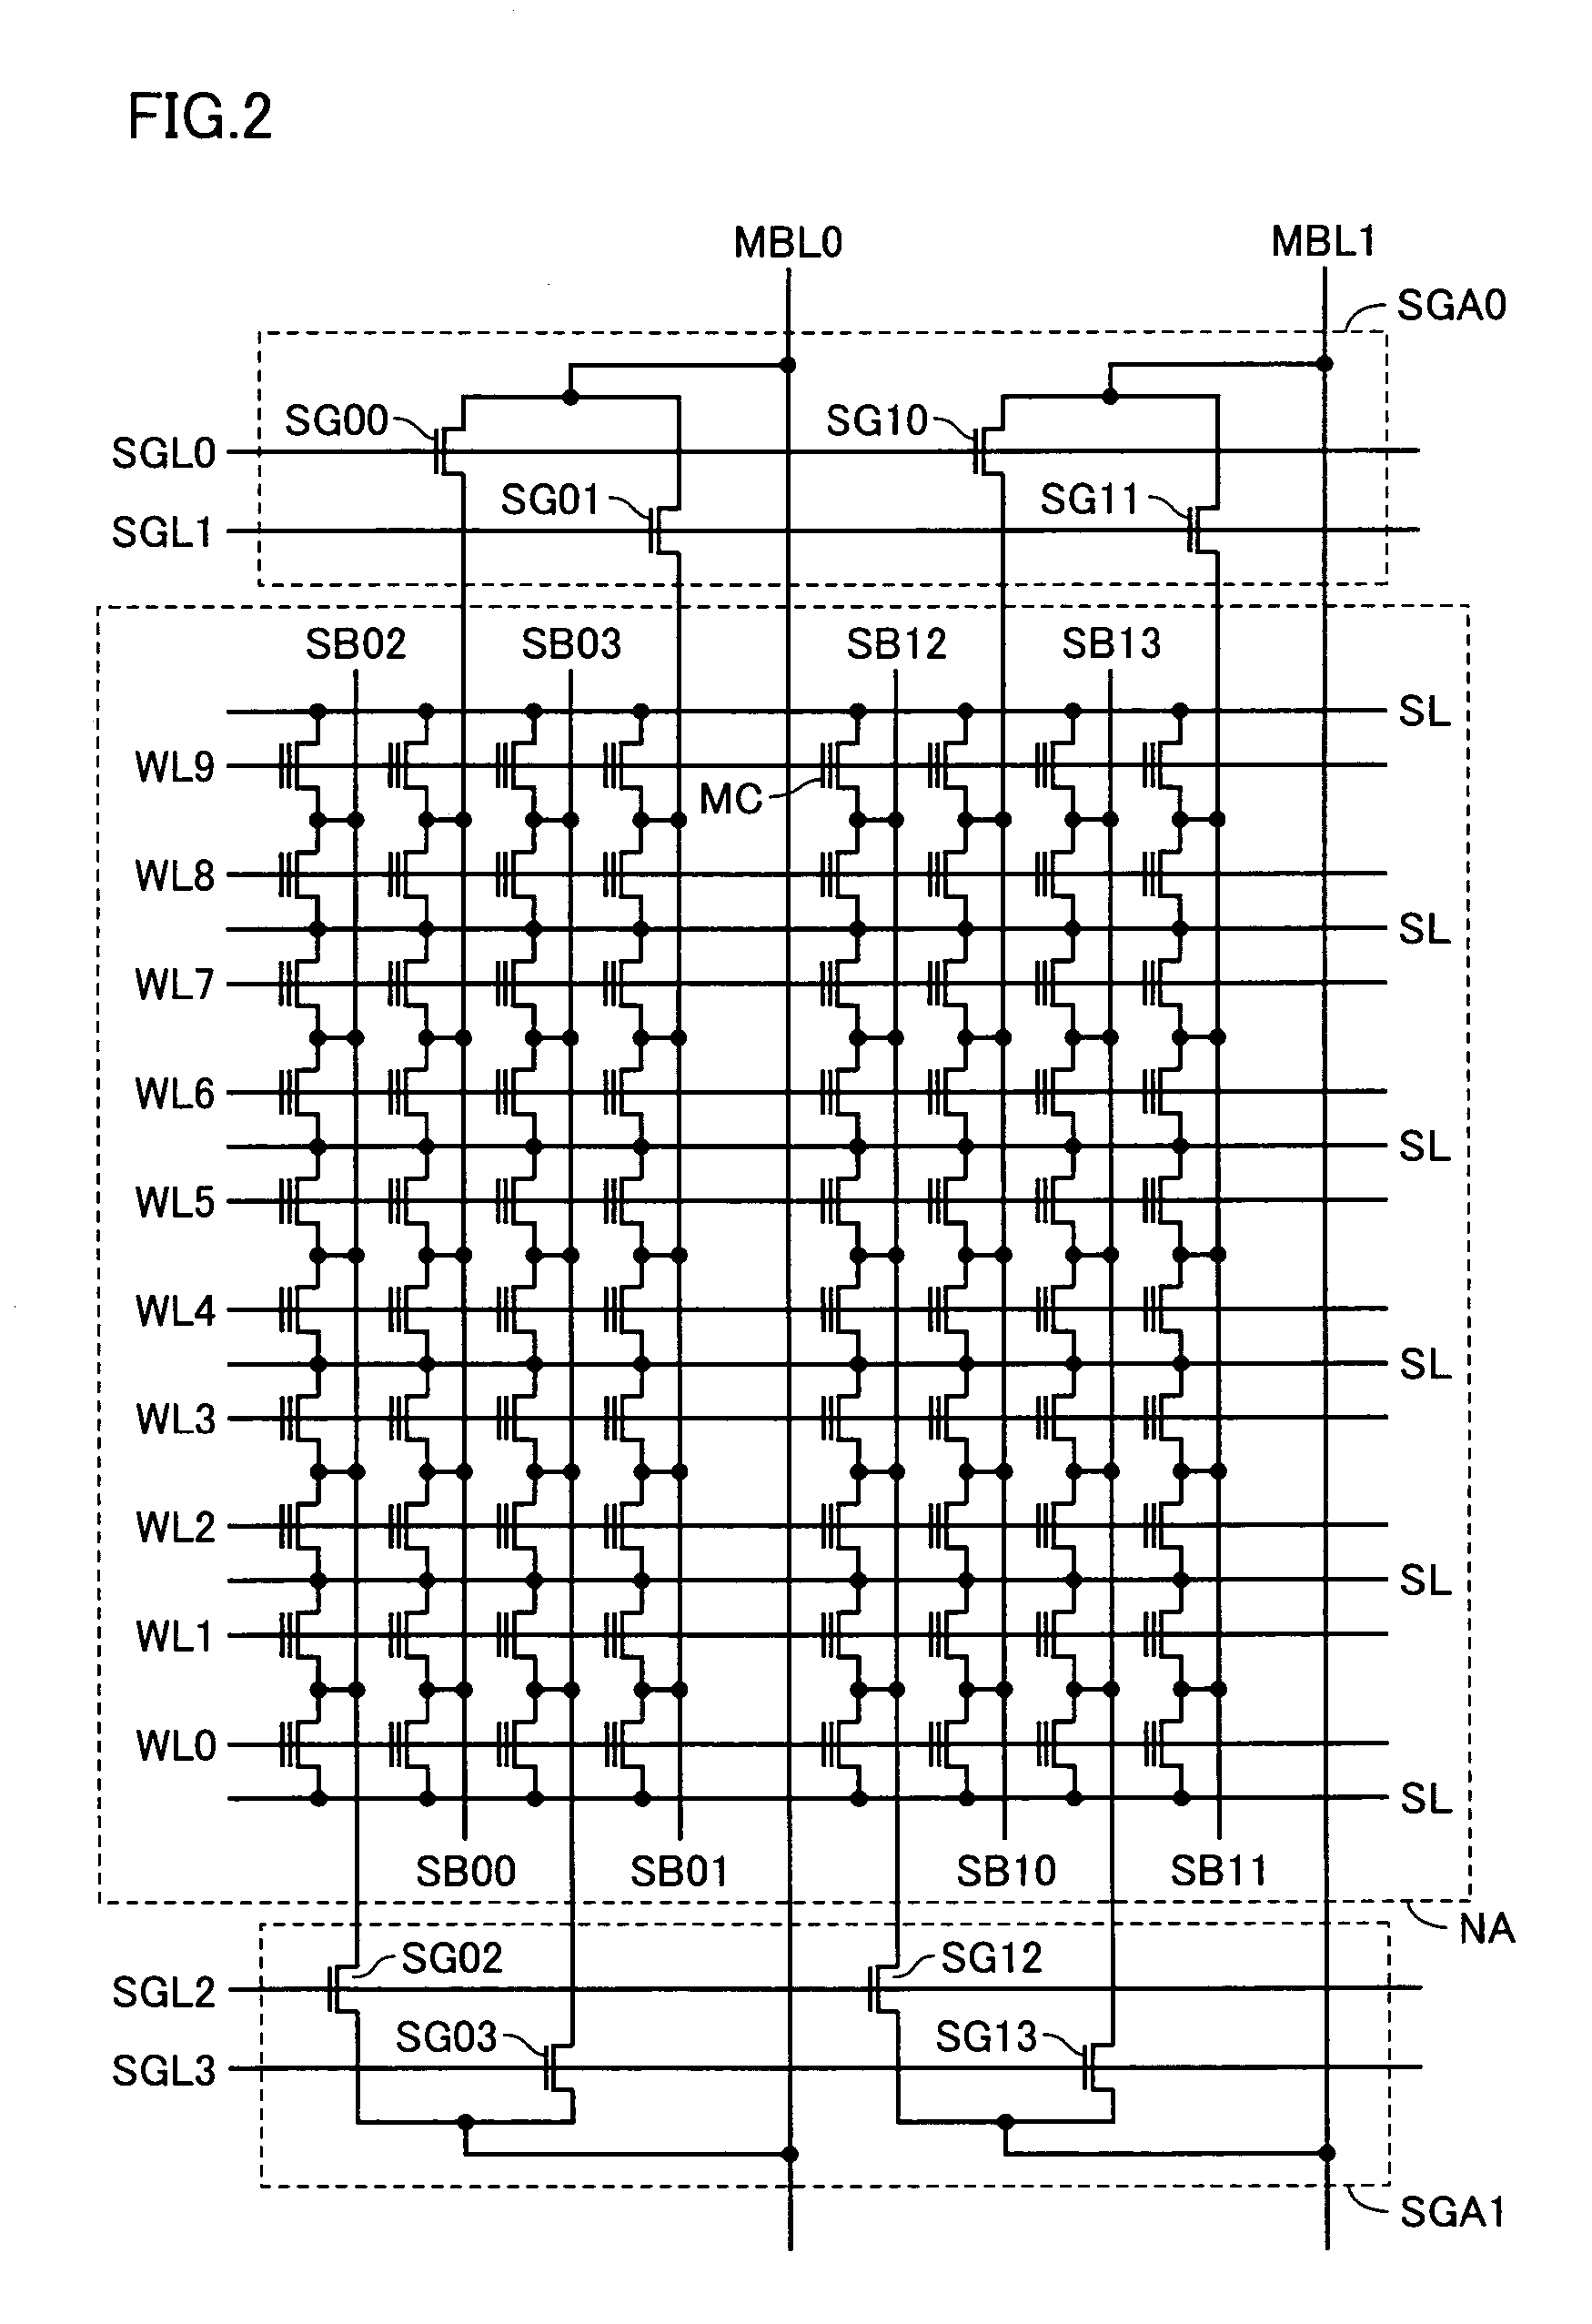 Nonvolatile semiconductor memory device including high efficiency and low cost redundant structure